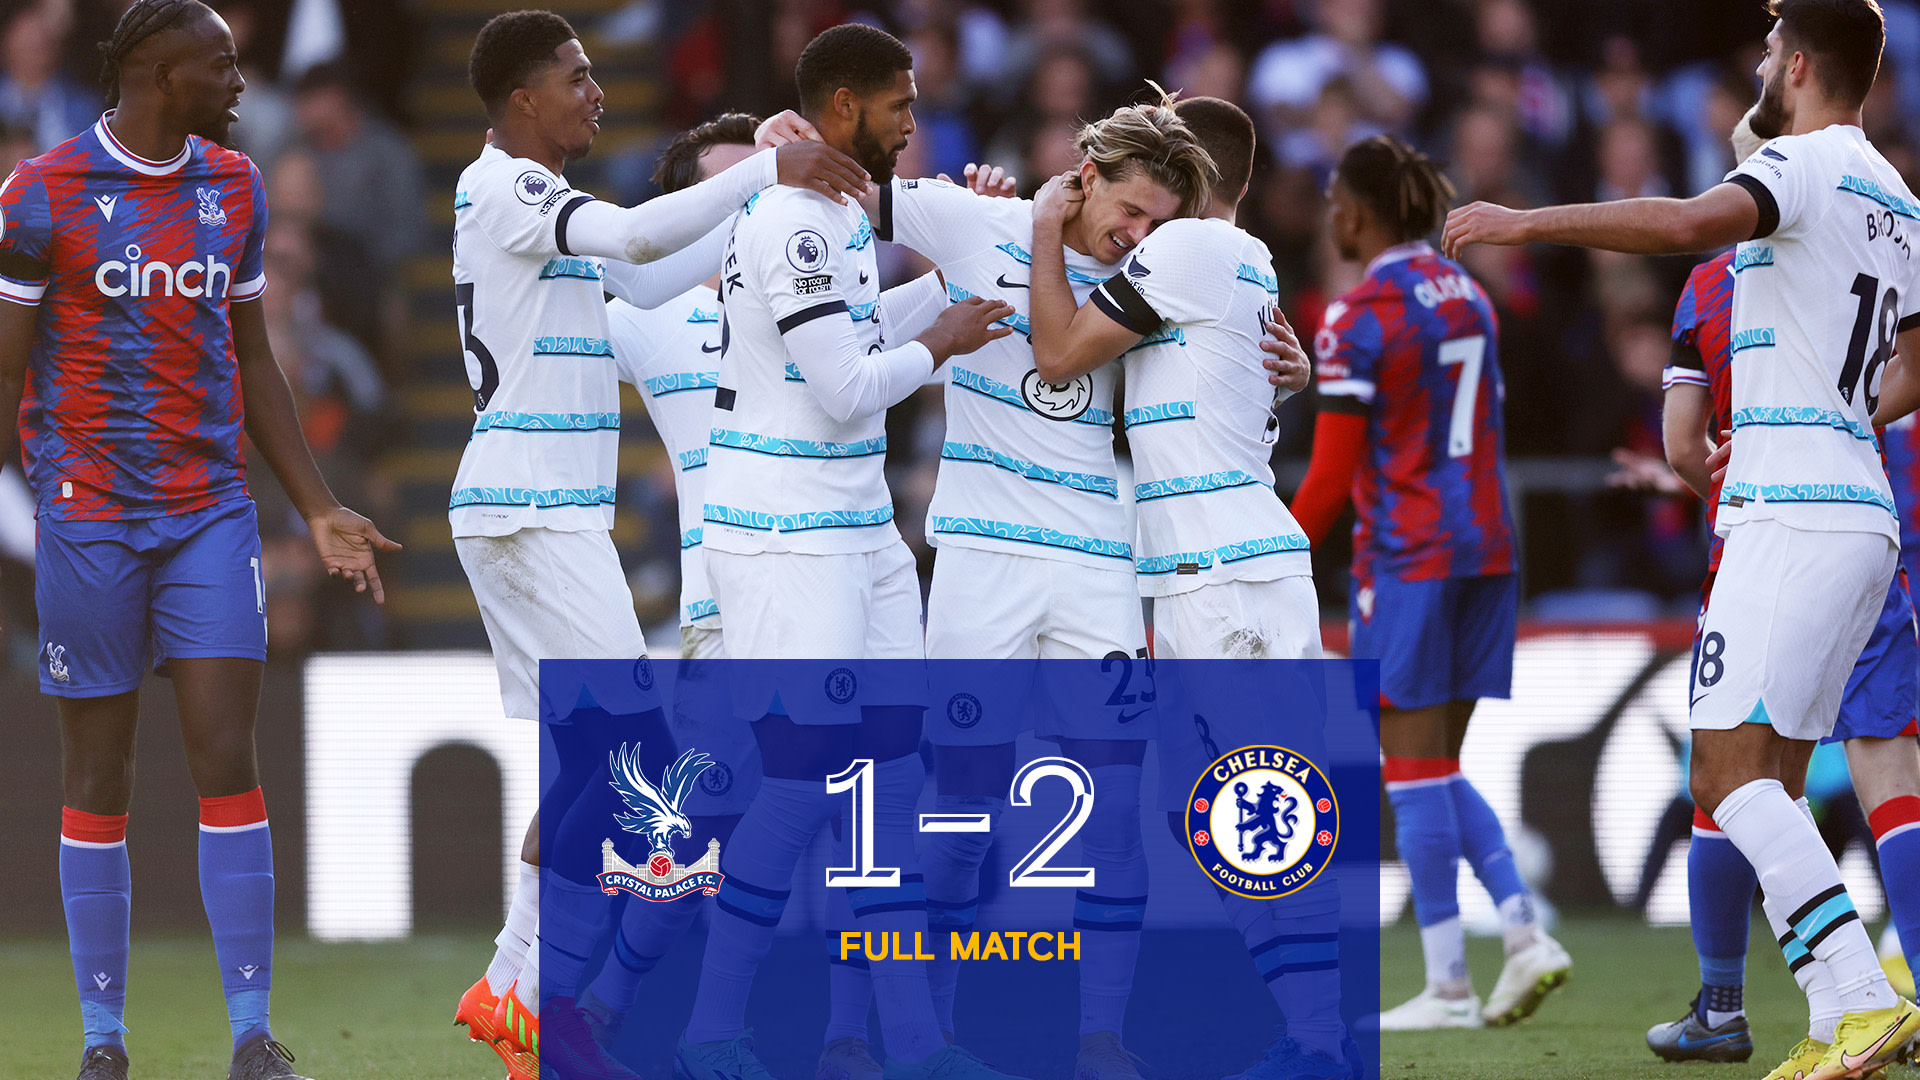 Highlights: Chelsea 2-1 Crystal Palace, Video, Official Site